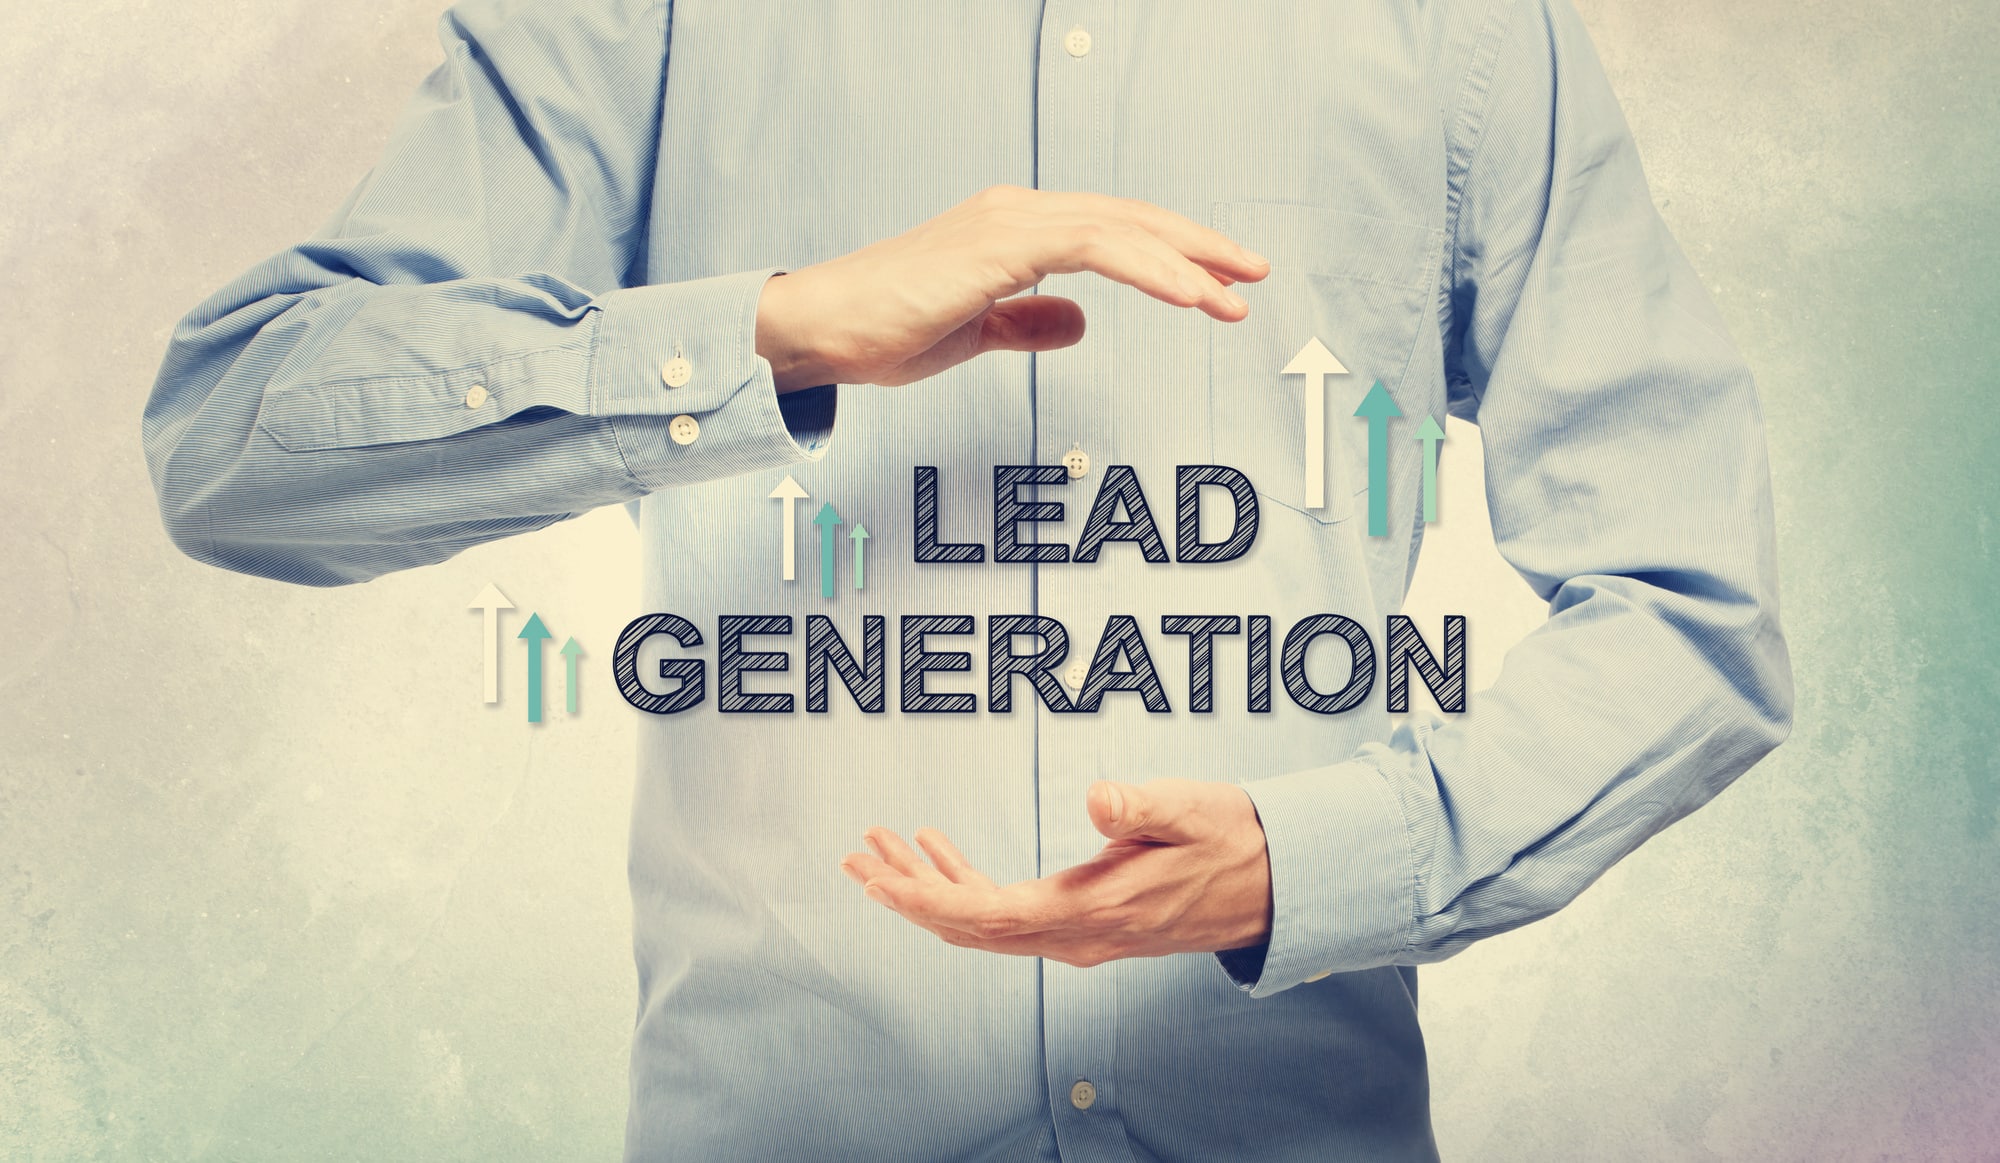 Reviews are Important for Lead Generation